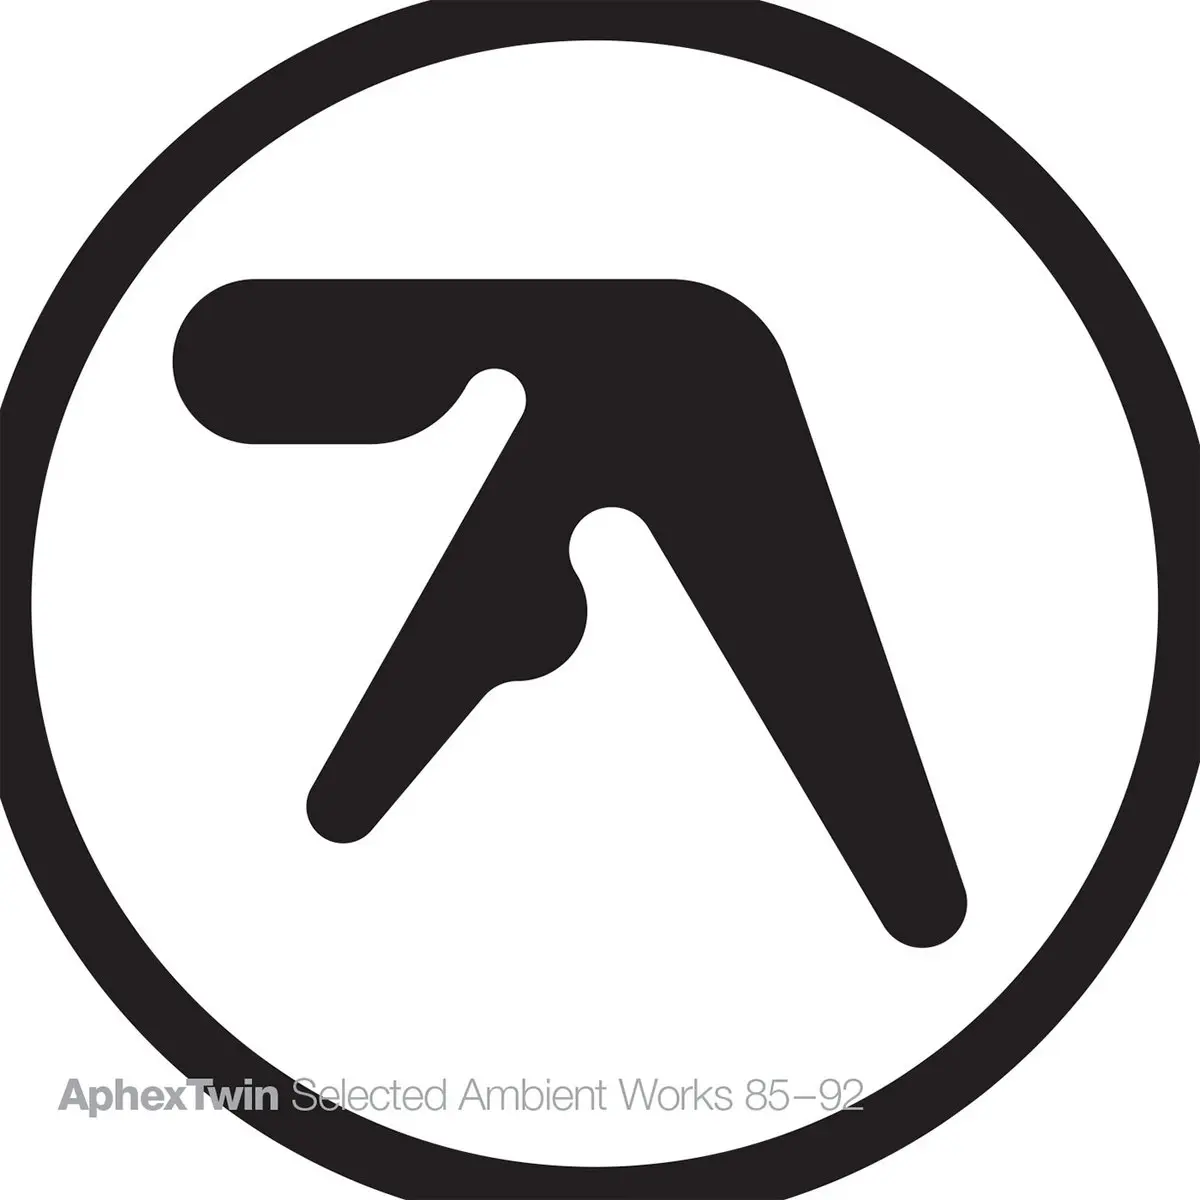 Aphex Twin - Selected Ambient Works 1